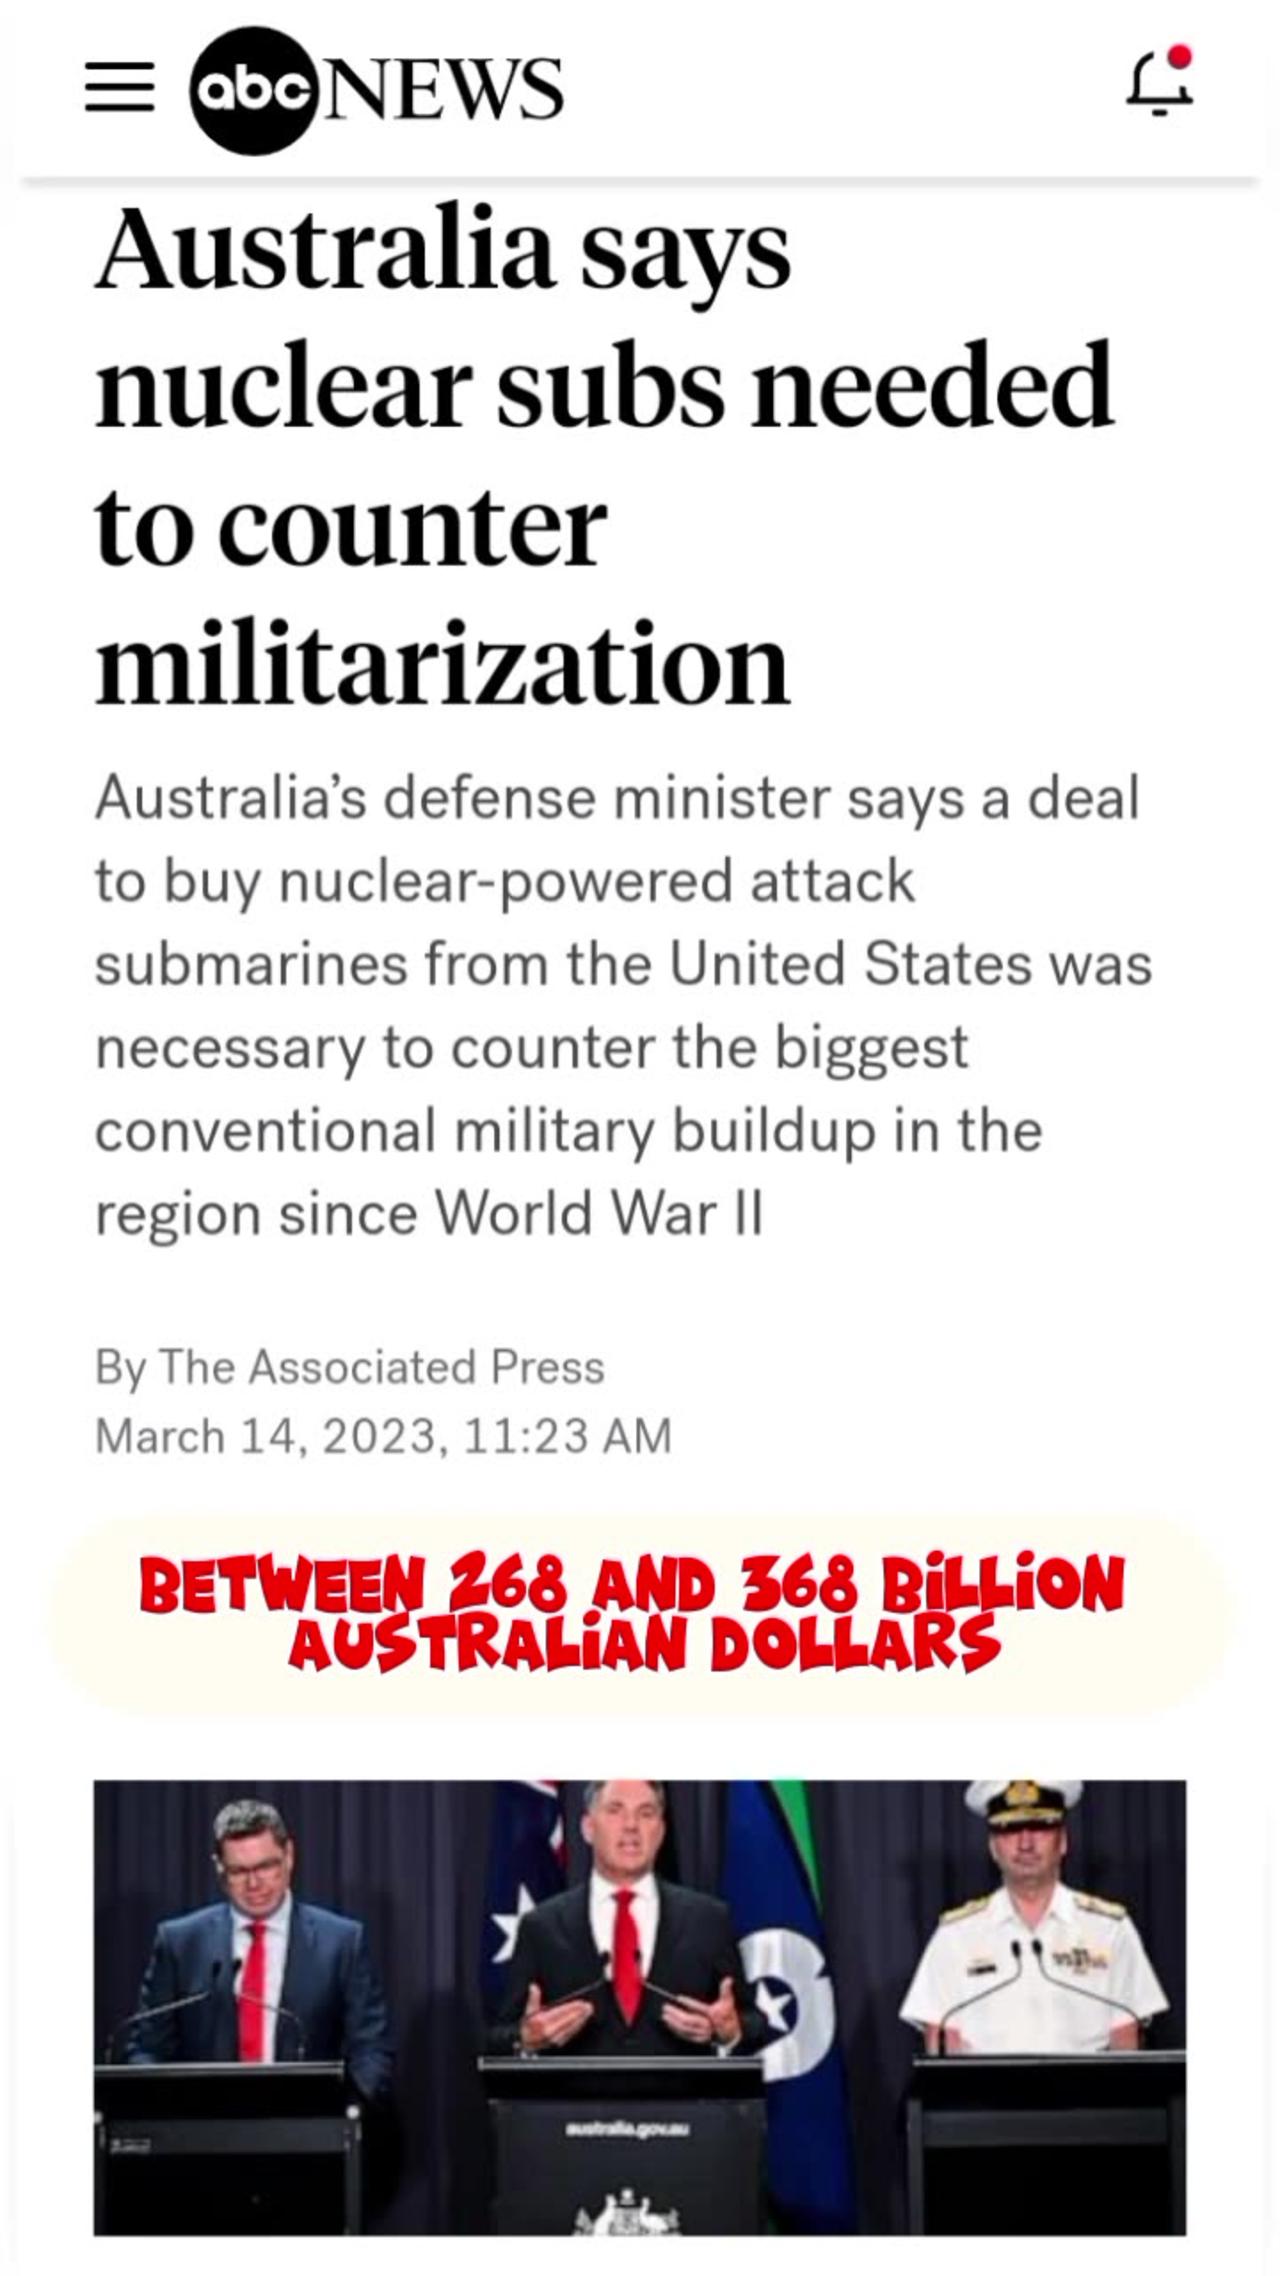 Inside Australia's Controversial Nuclear Submarine Deal: Countering China's Military Buildup?